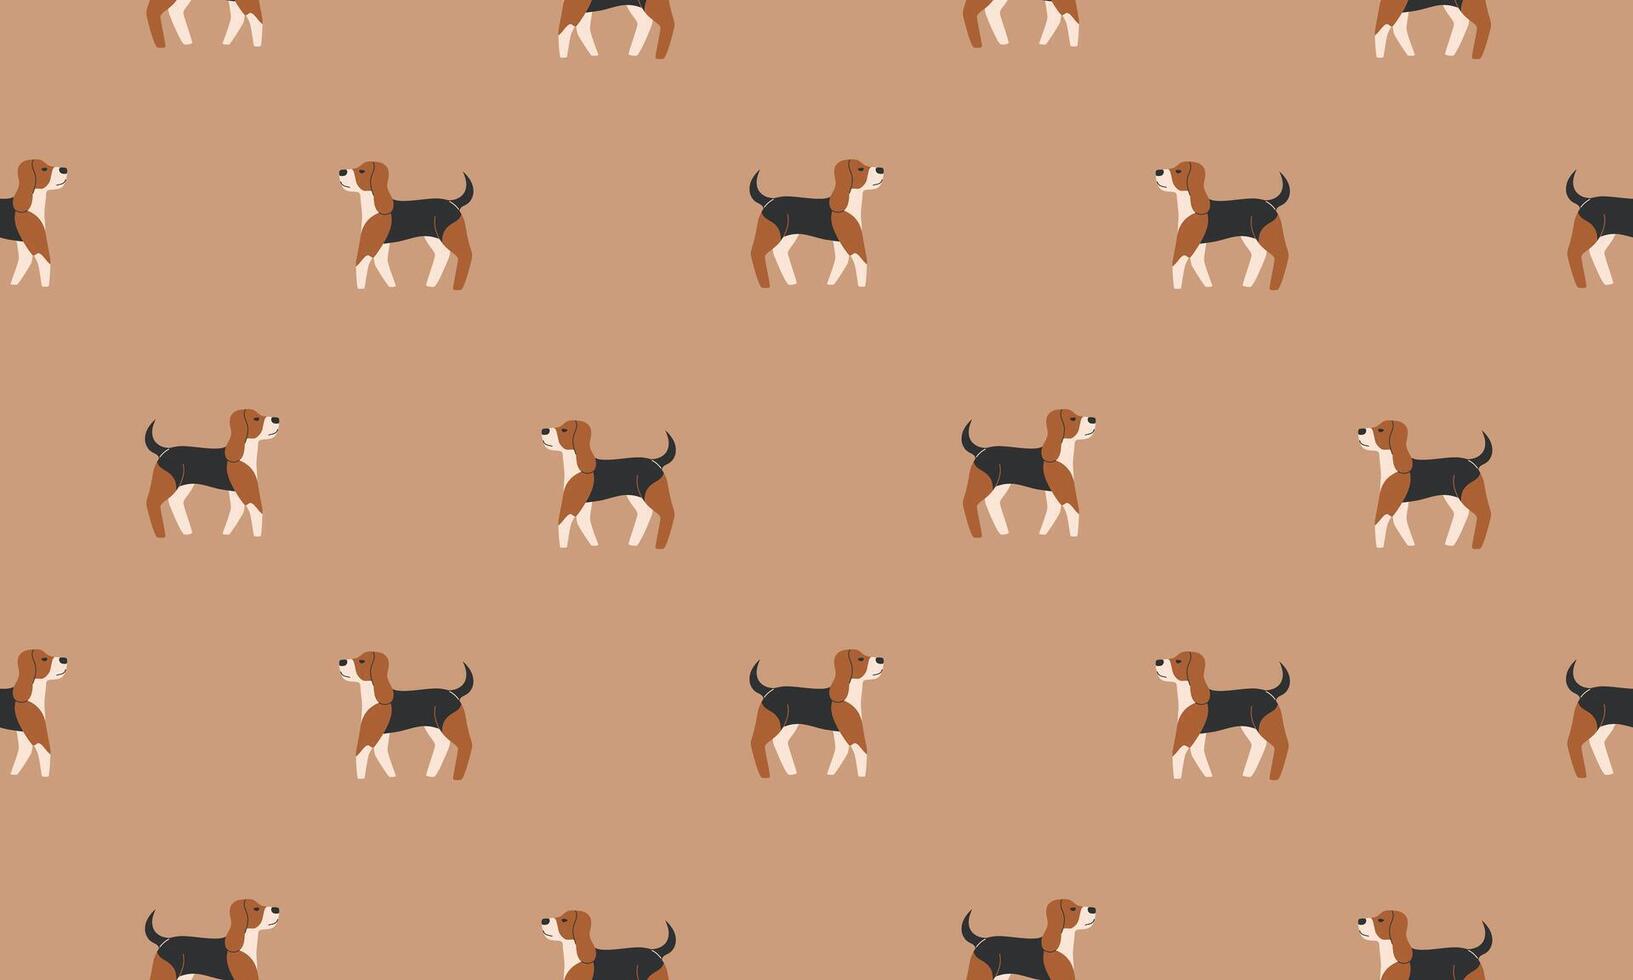 Seamless pattern with Cute Beagle. Dogs of different breeds. Side view. Flat illustration vector